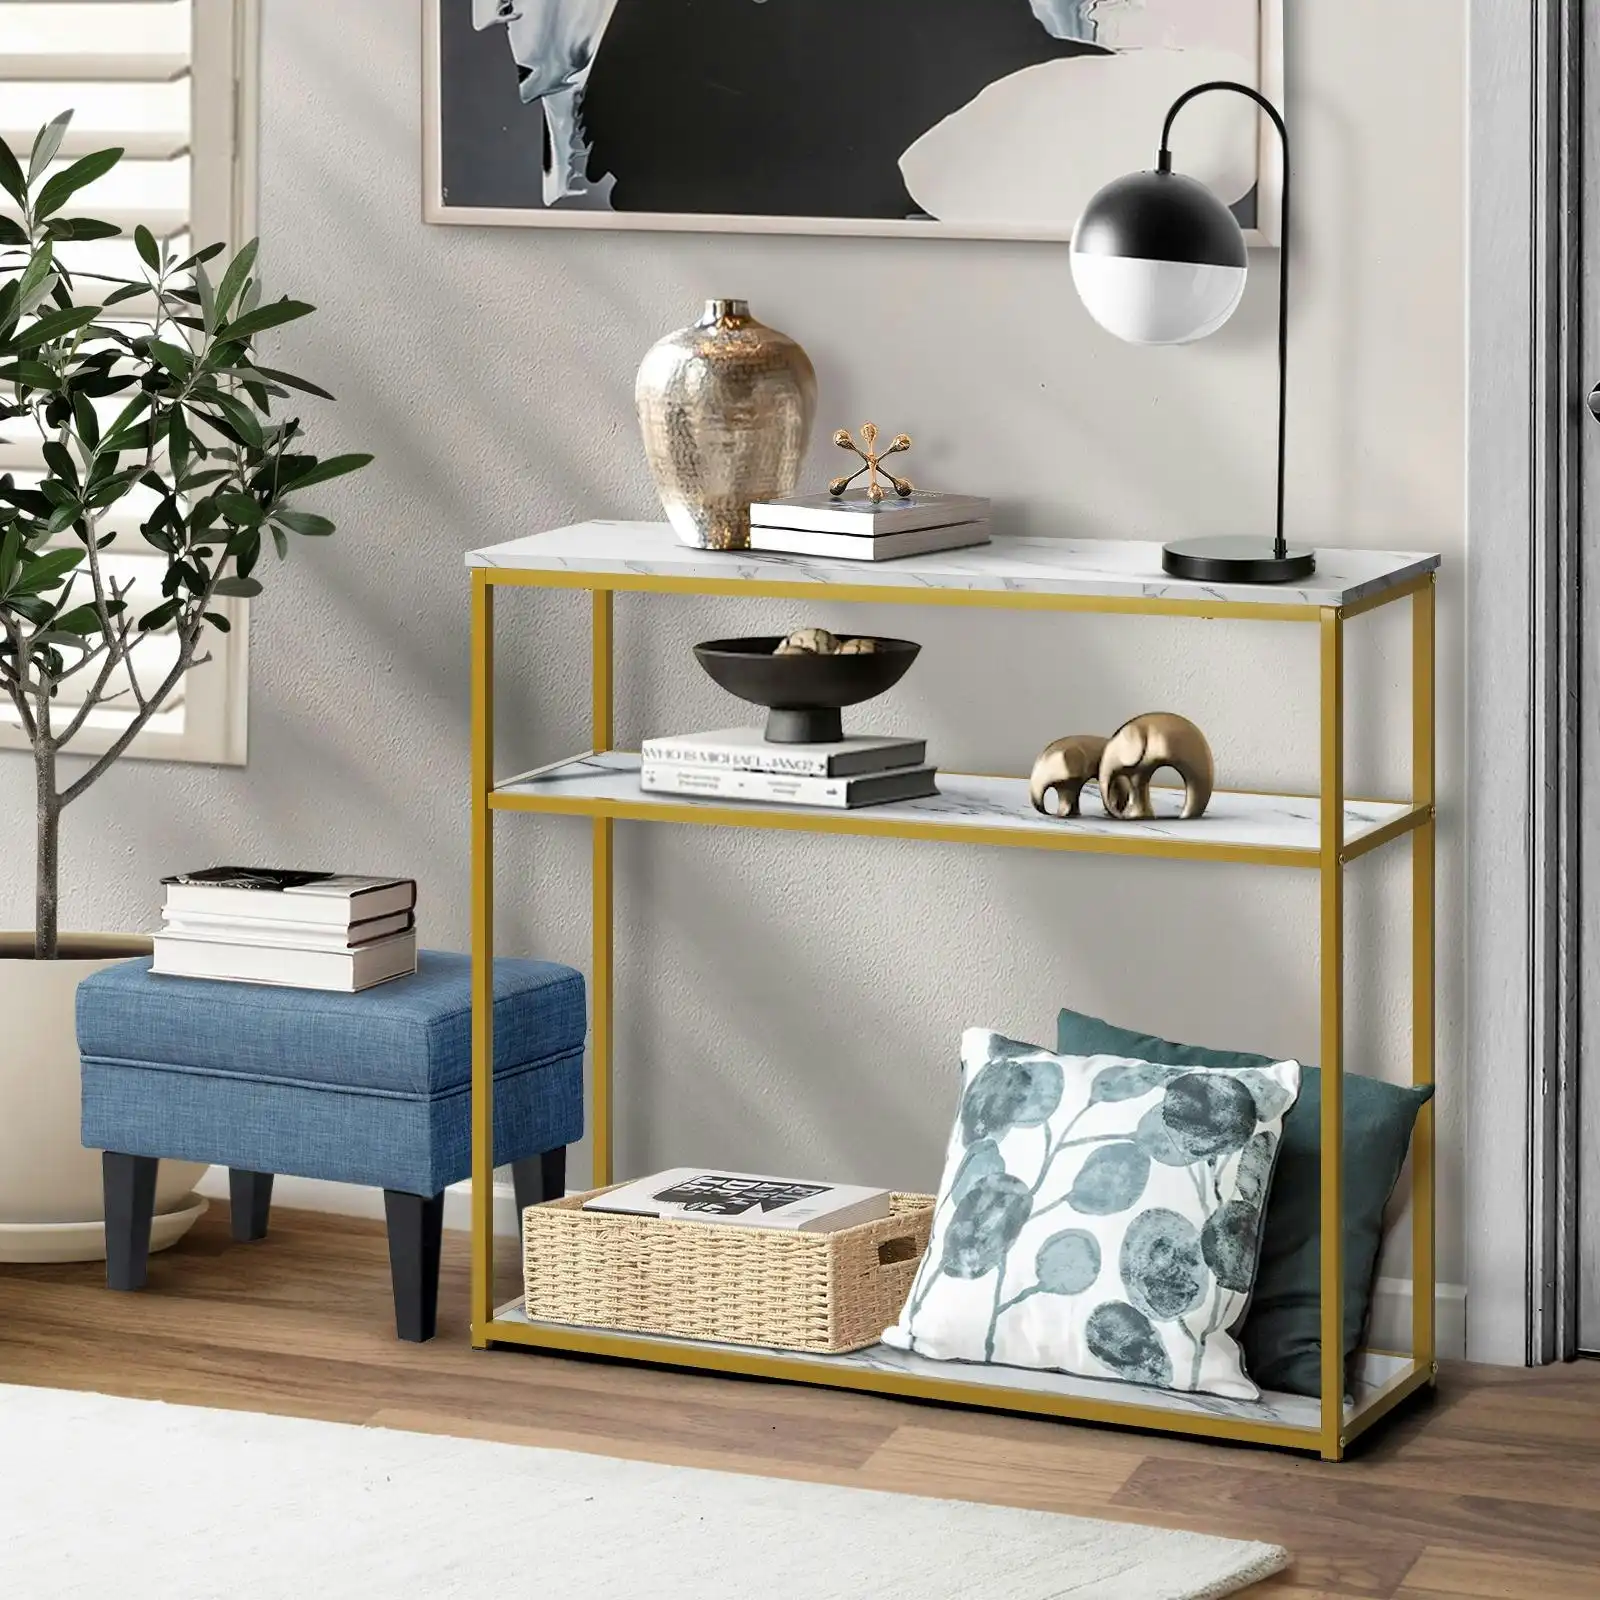 Oikiture Hall Console Table Metal Hallway Desk Entry Display White&Gold Furniture